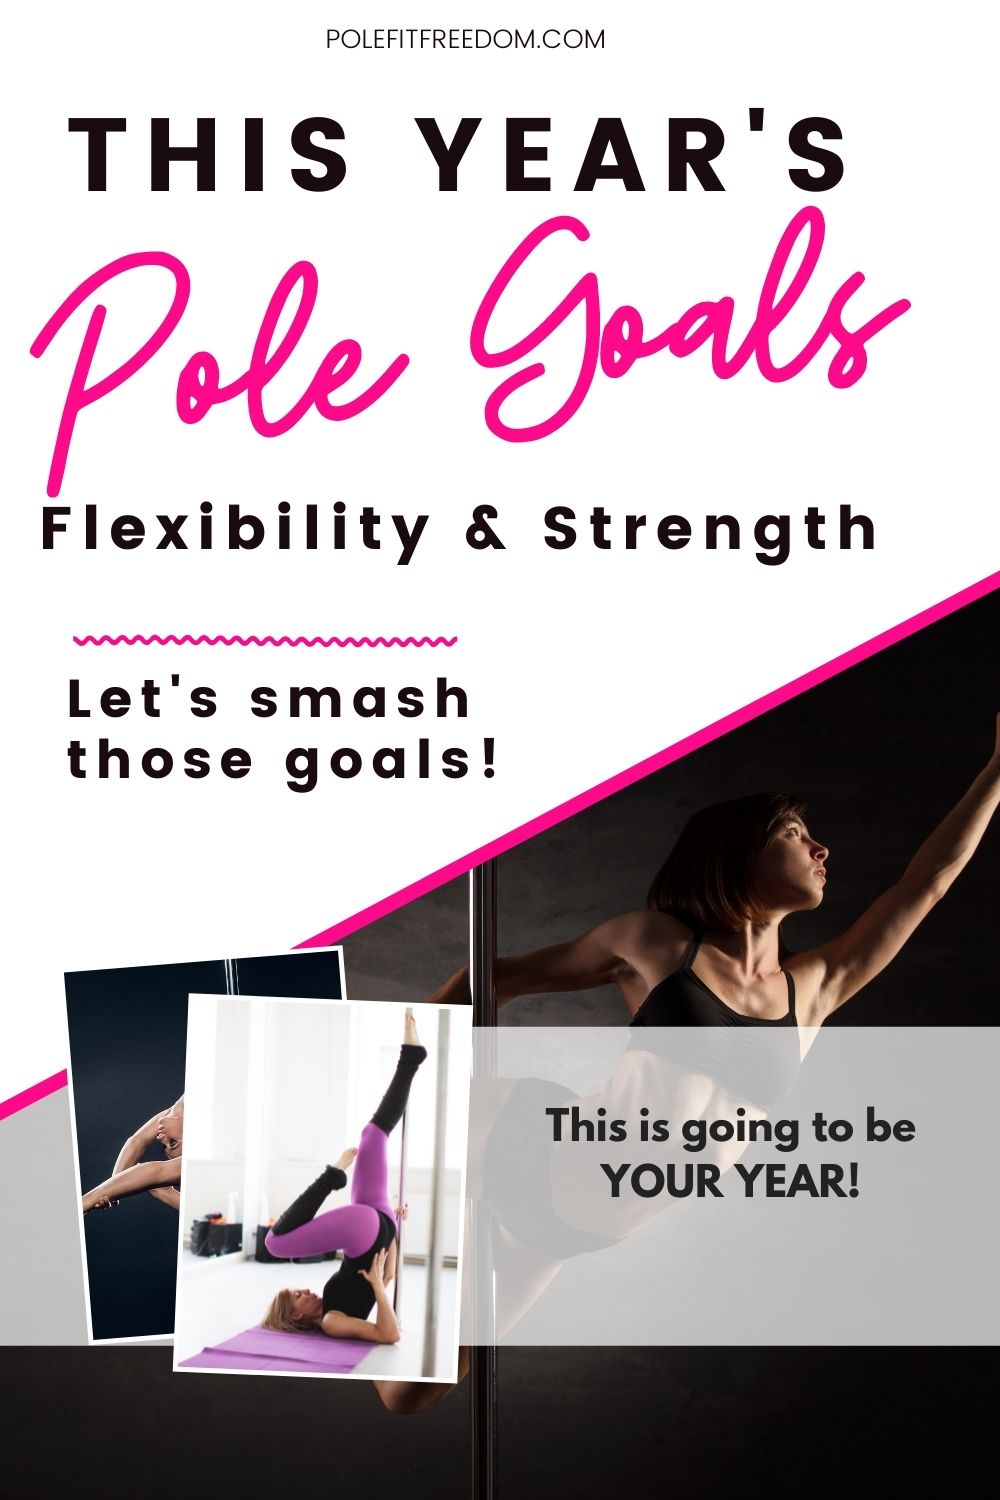 This year's Pole Goals - flexibility and strength - let's smash those goals! 